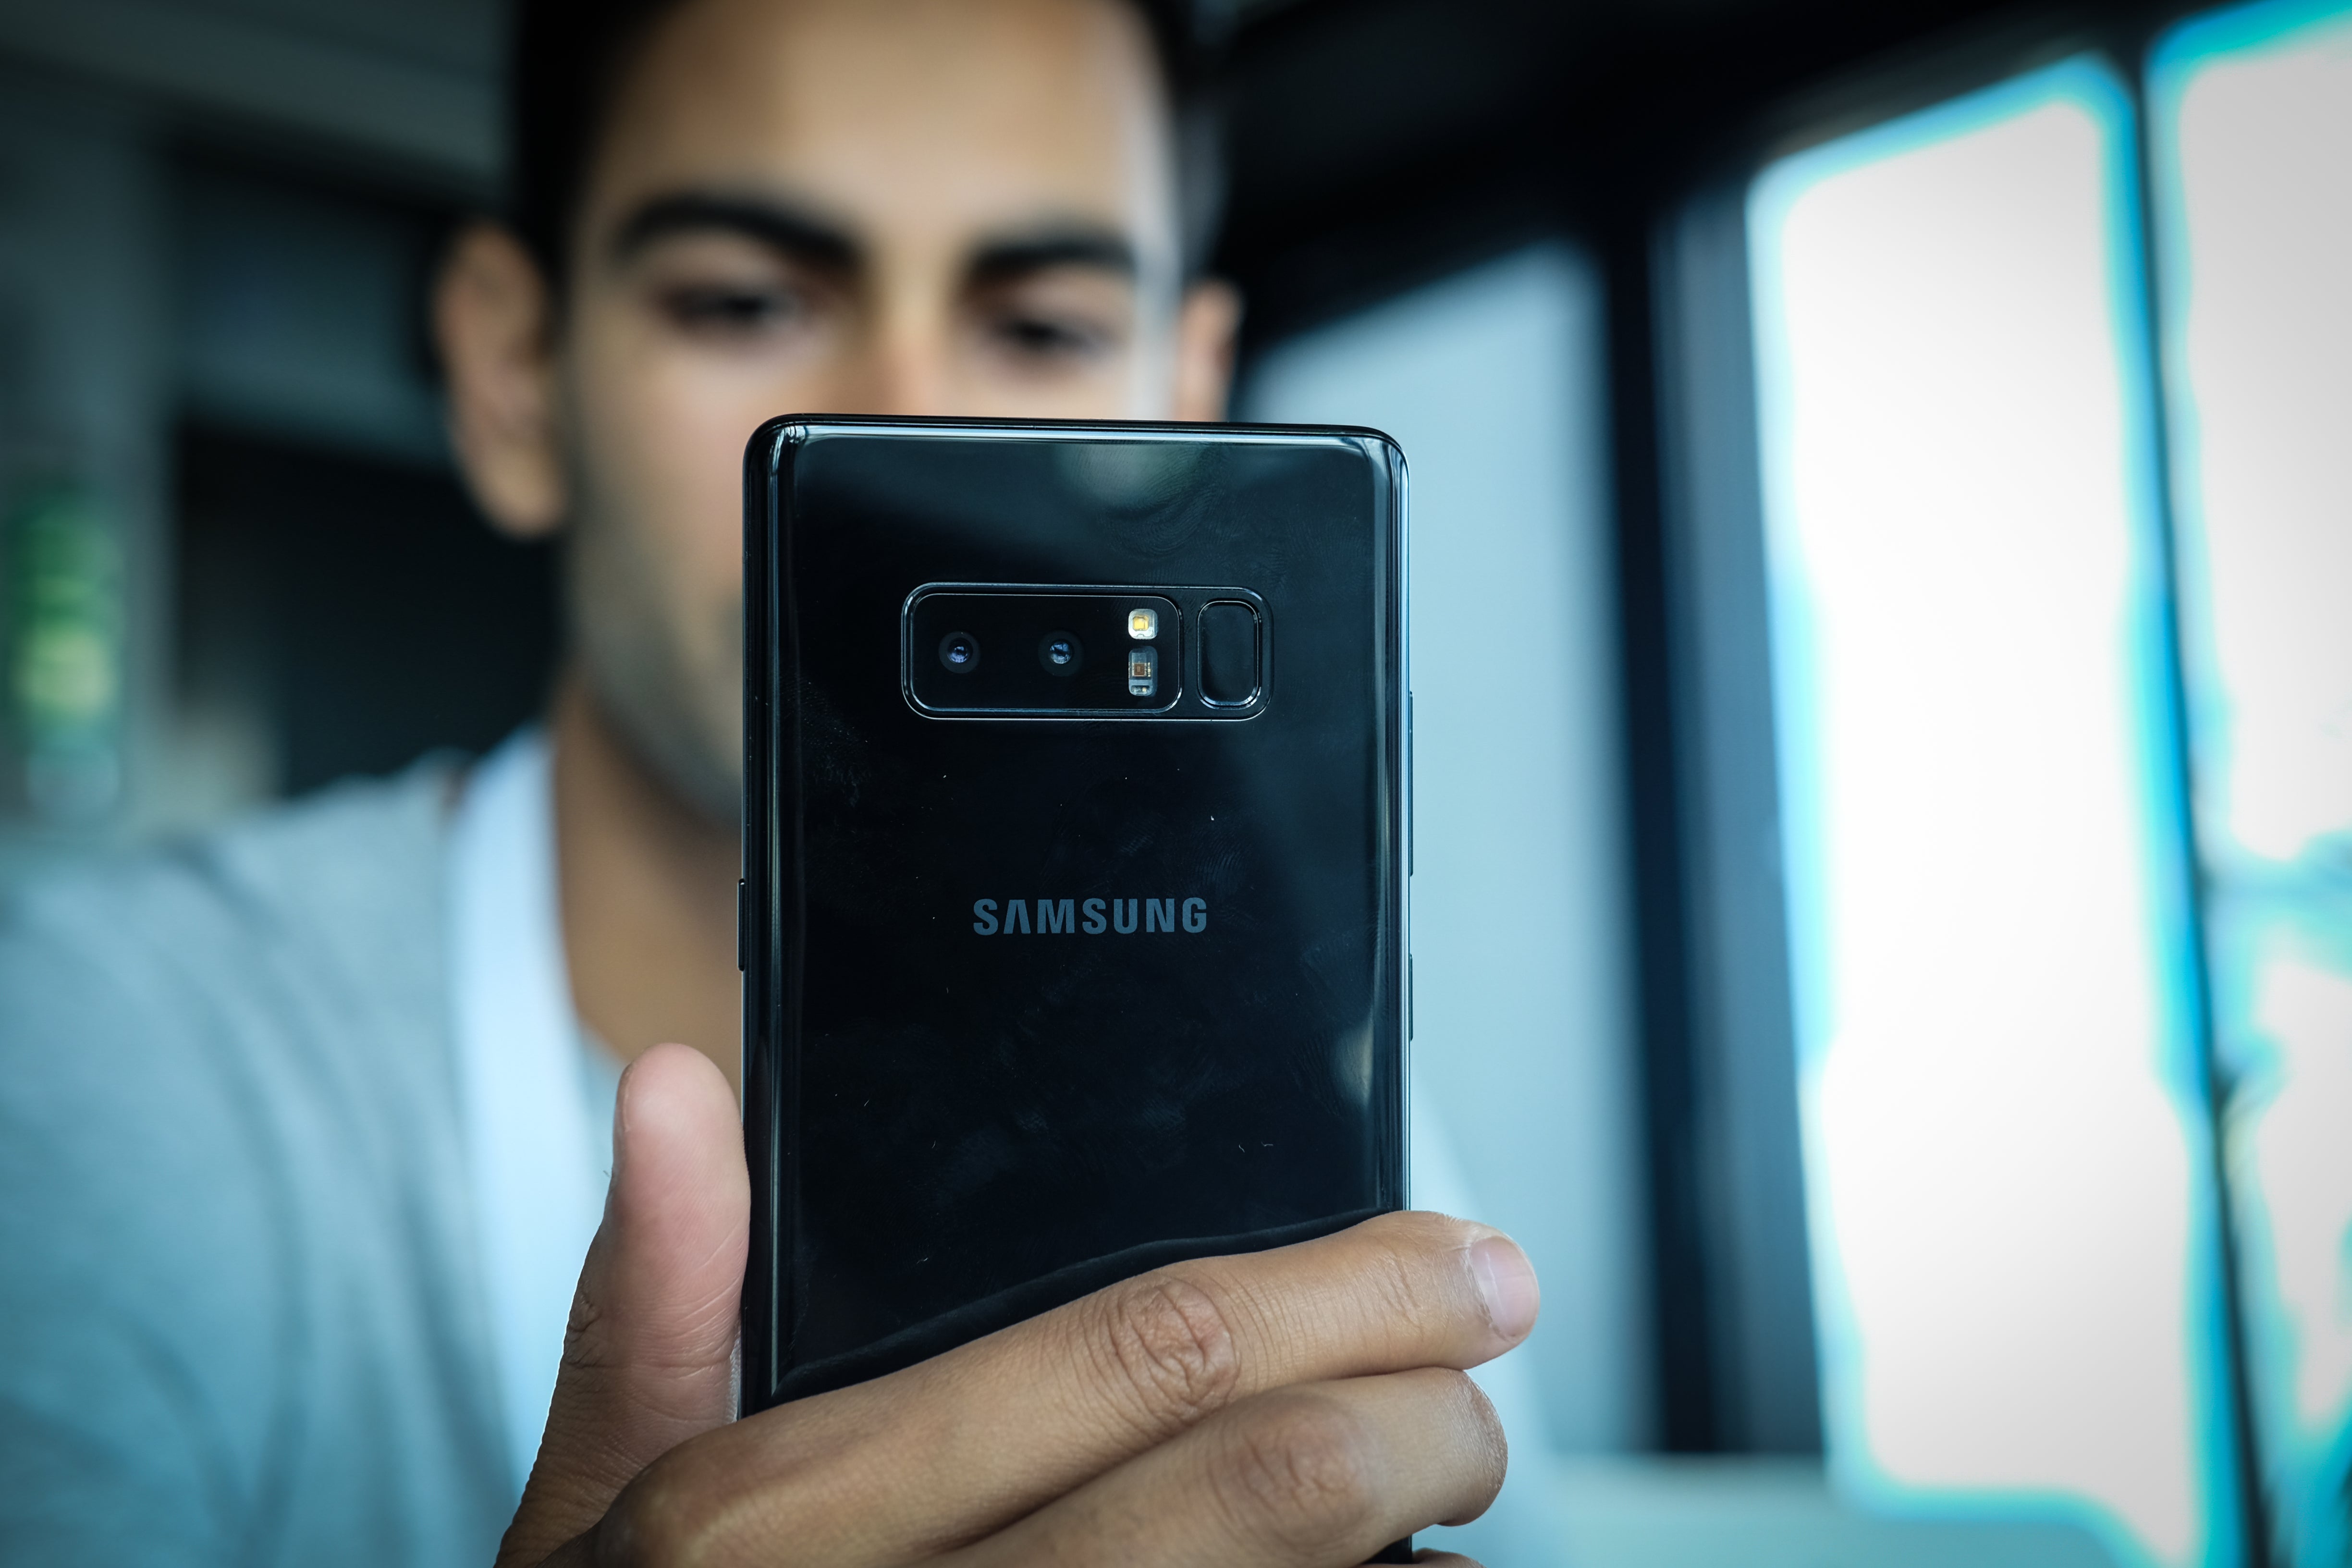 Person holding a Samsung Galaxy Note 8 smartphone.